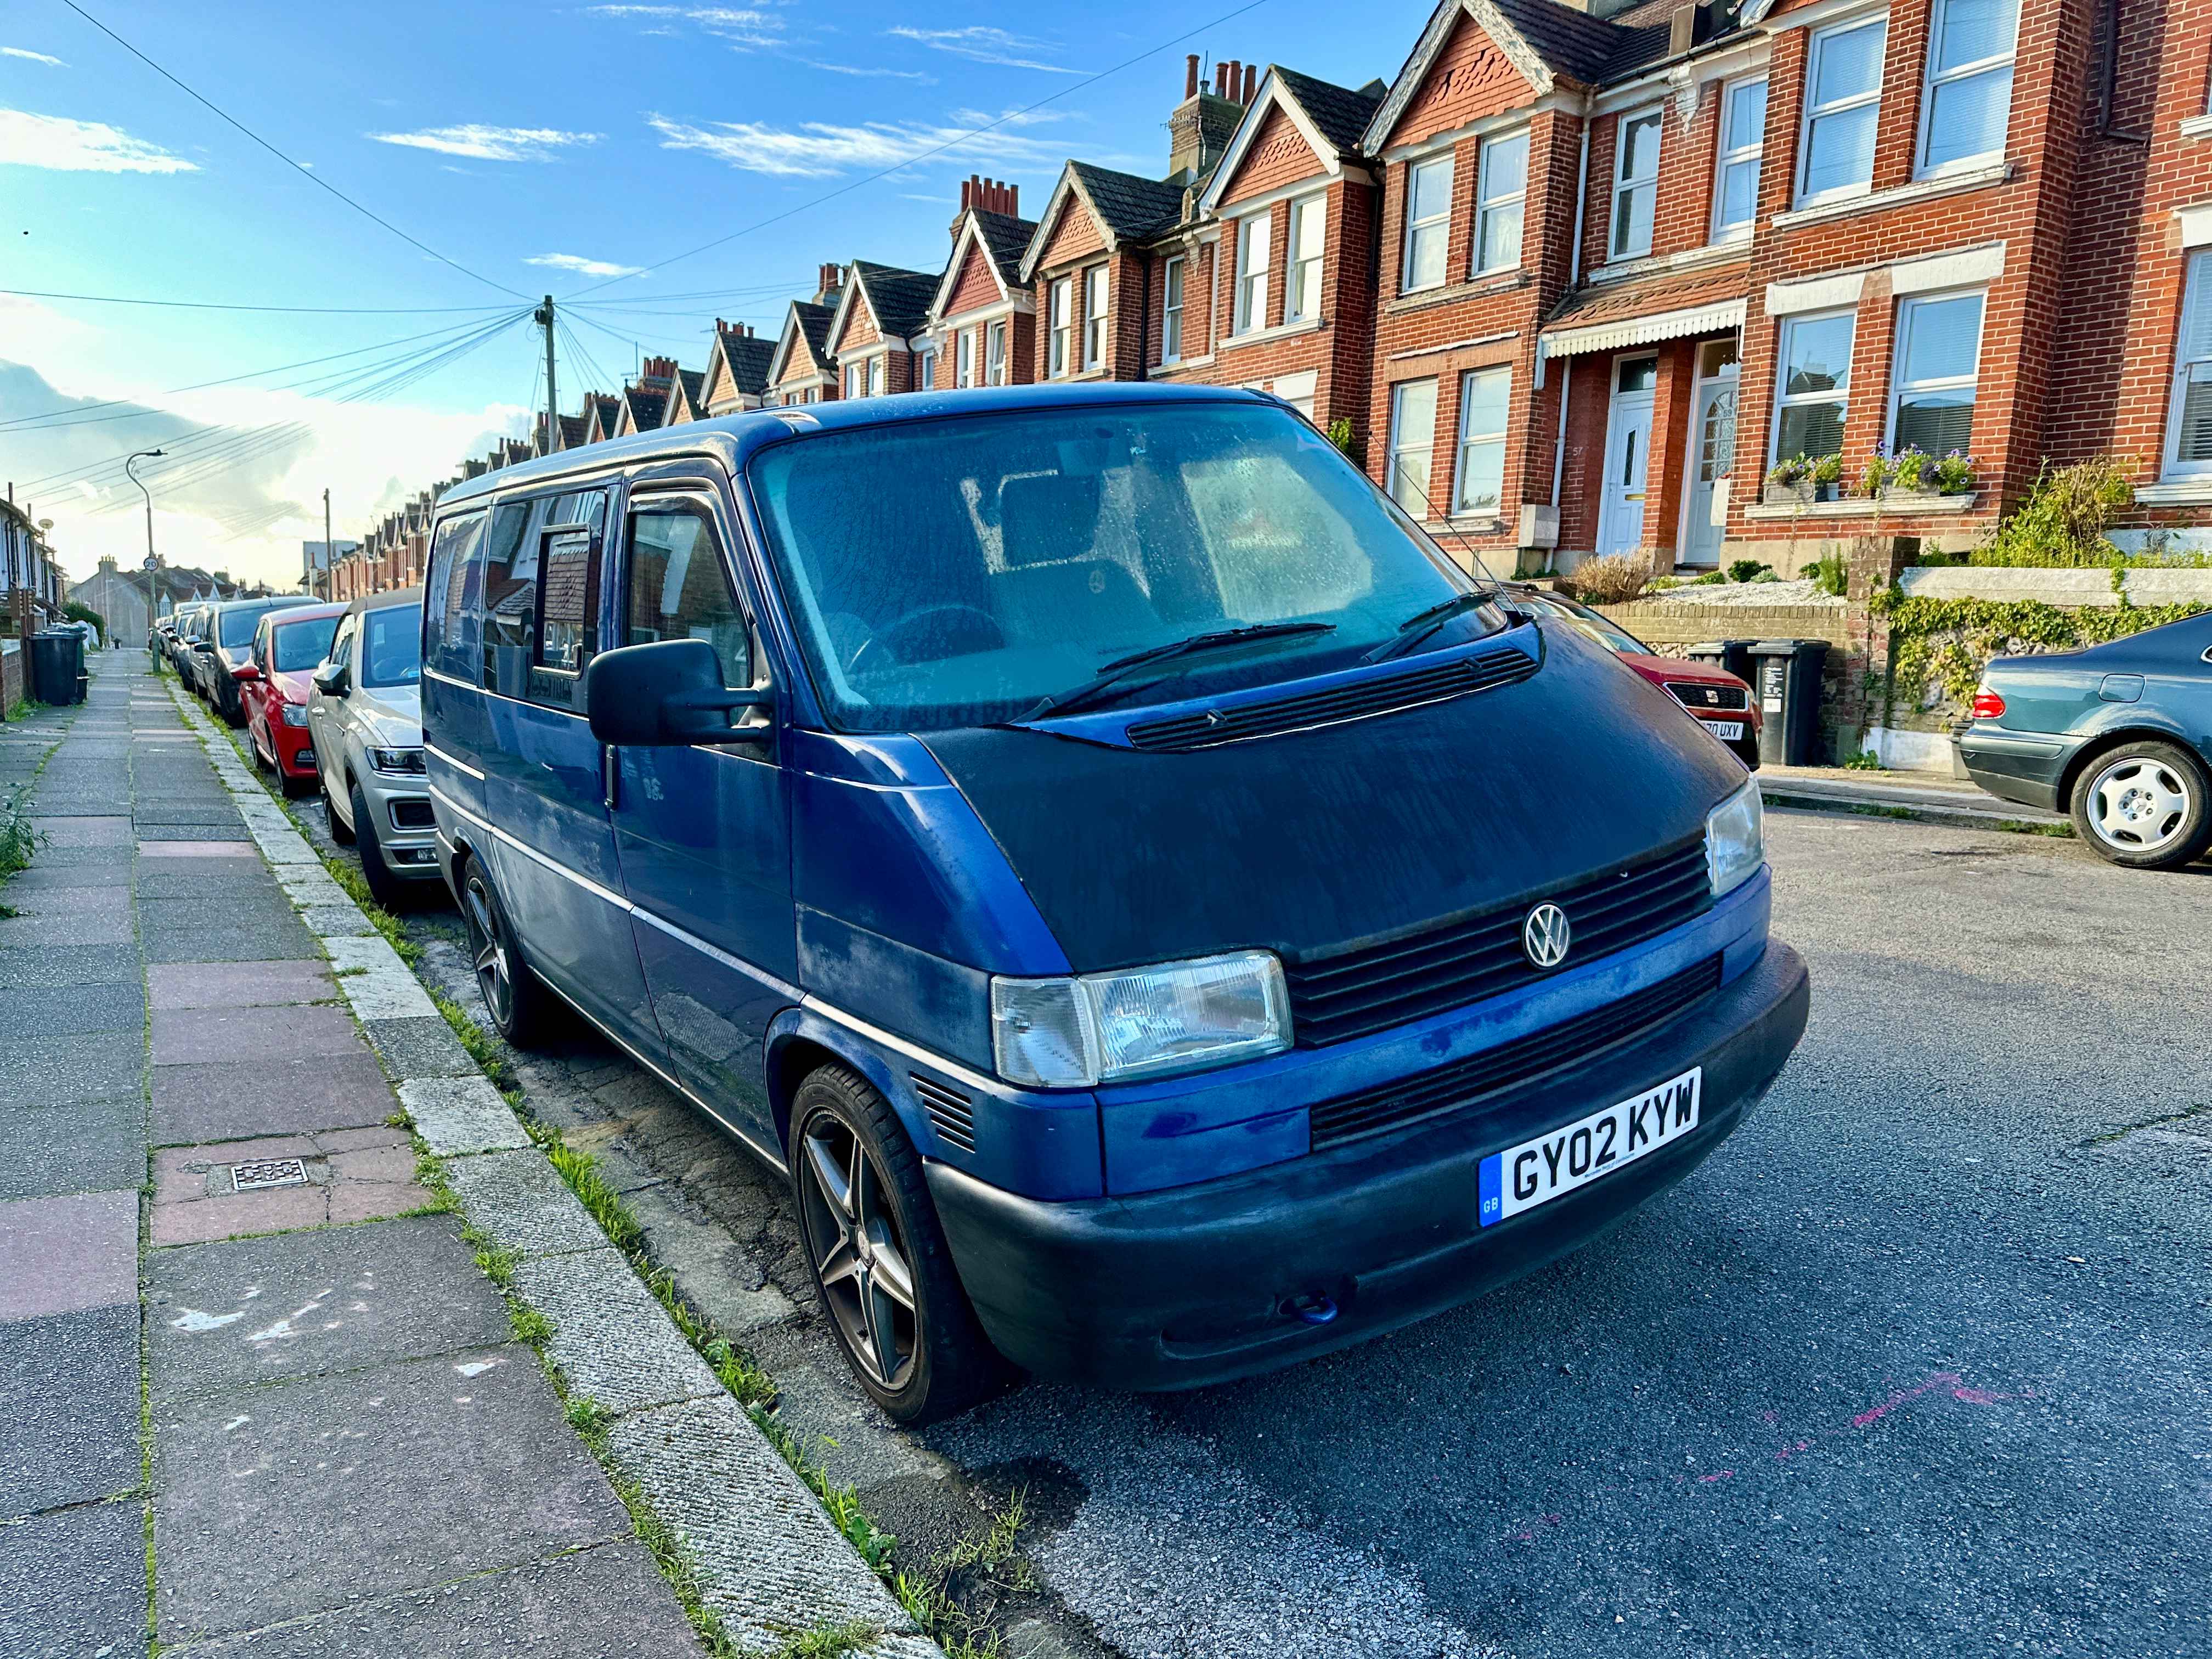 Photograph of GY02 KYW - a Blue Volkswagen Transporter camper van parked in Hollingdean by a non-resident. The sixteenth of eighteen photographs supplied by the residents of Hollingdean.